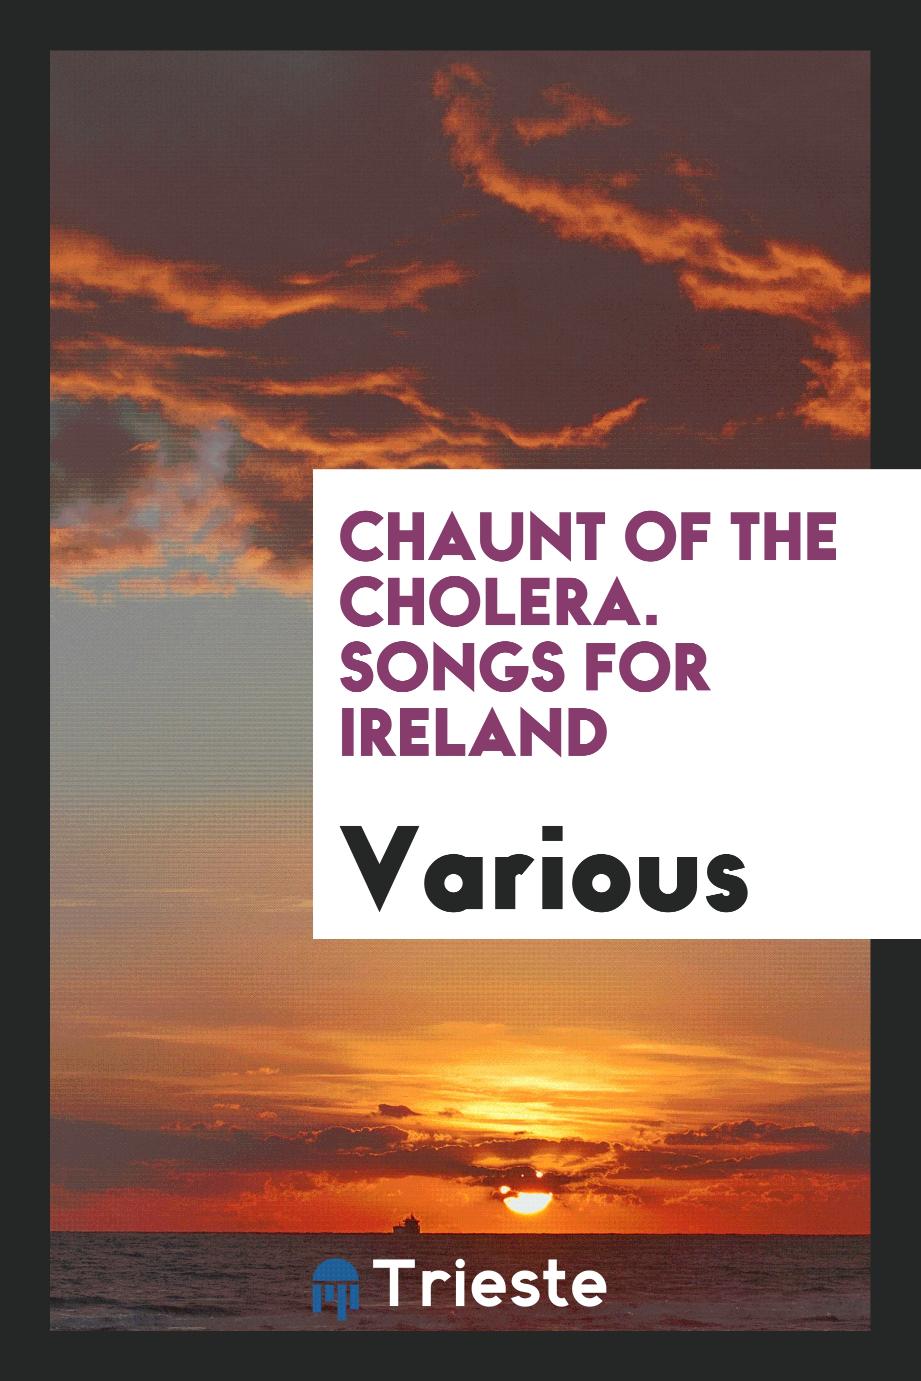 Chaunt of the Cholera. Songs for Ireland